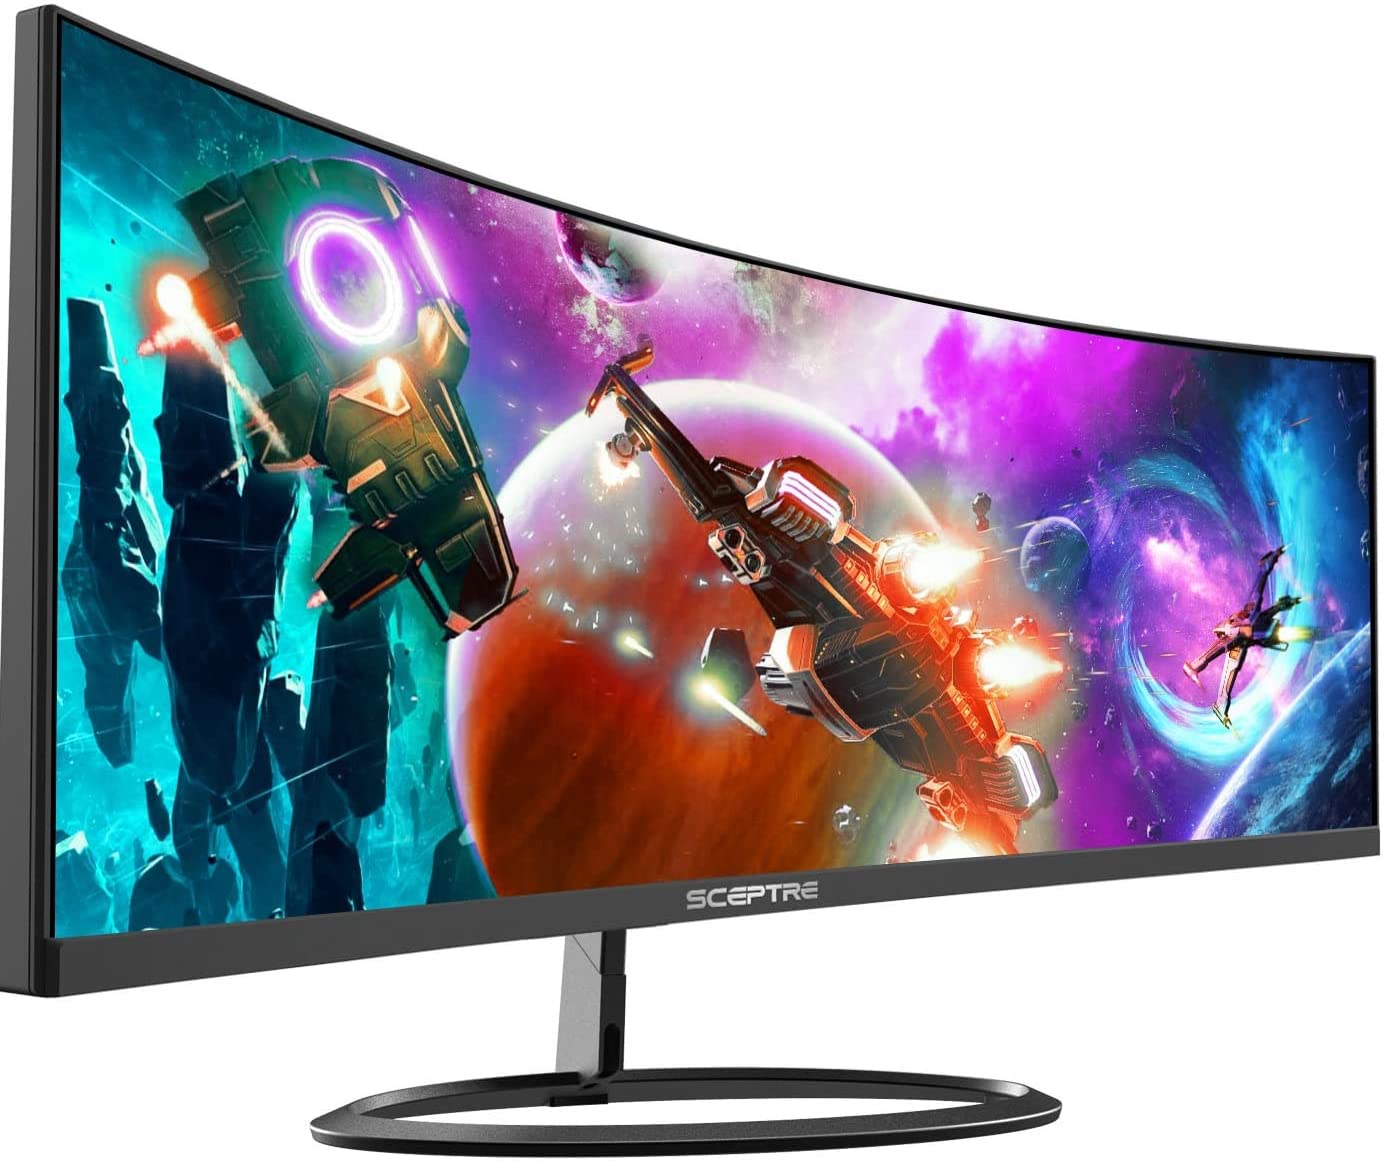 1. Scepter Curved 30" 21:9 Gaming LED Monitor